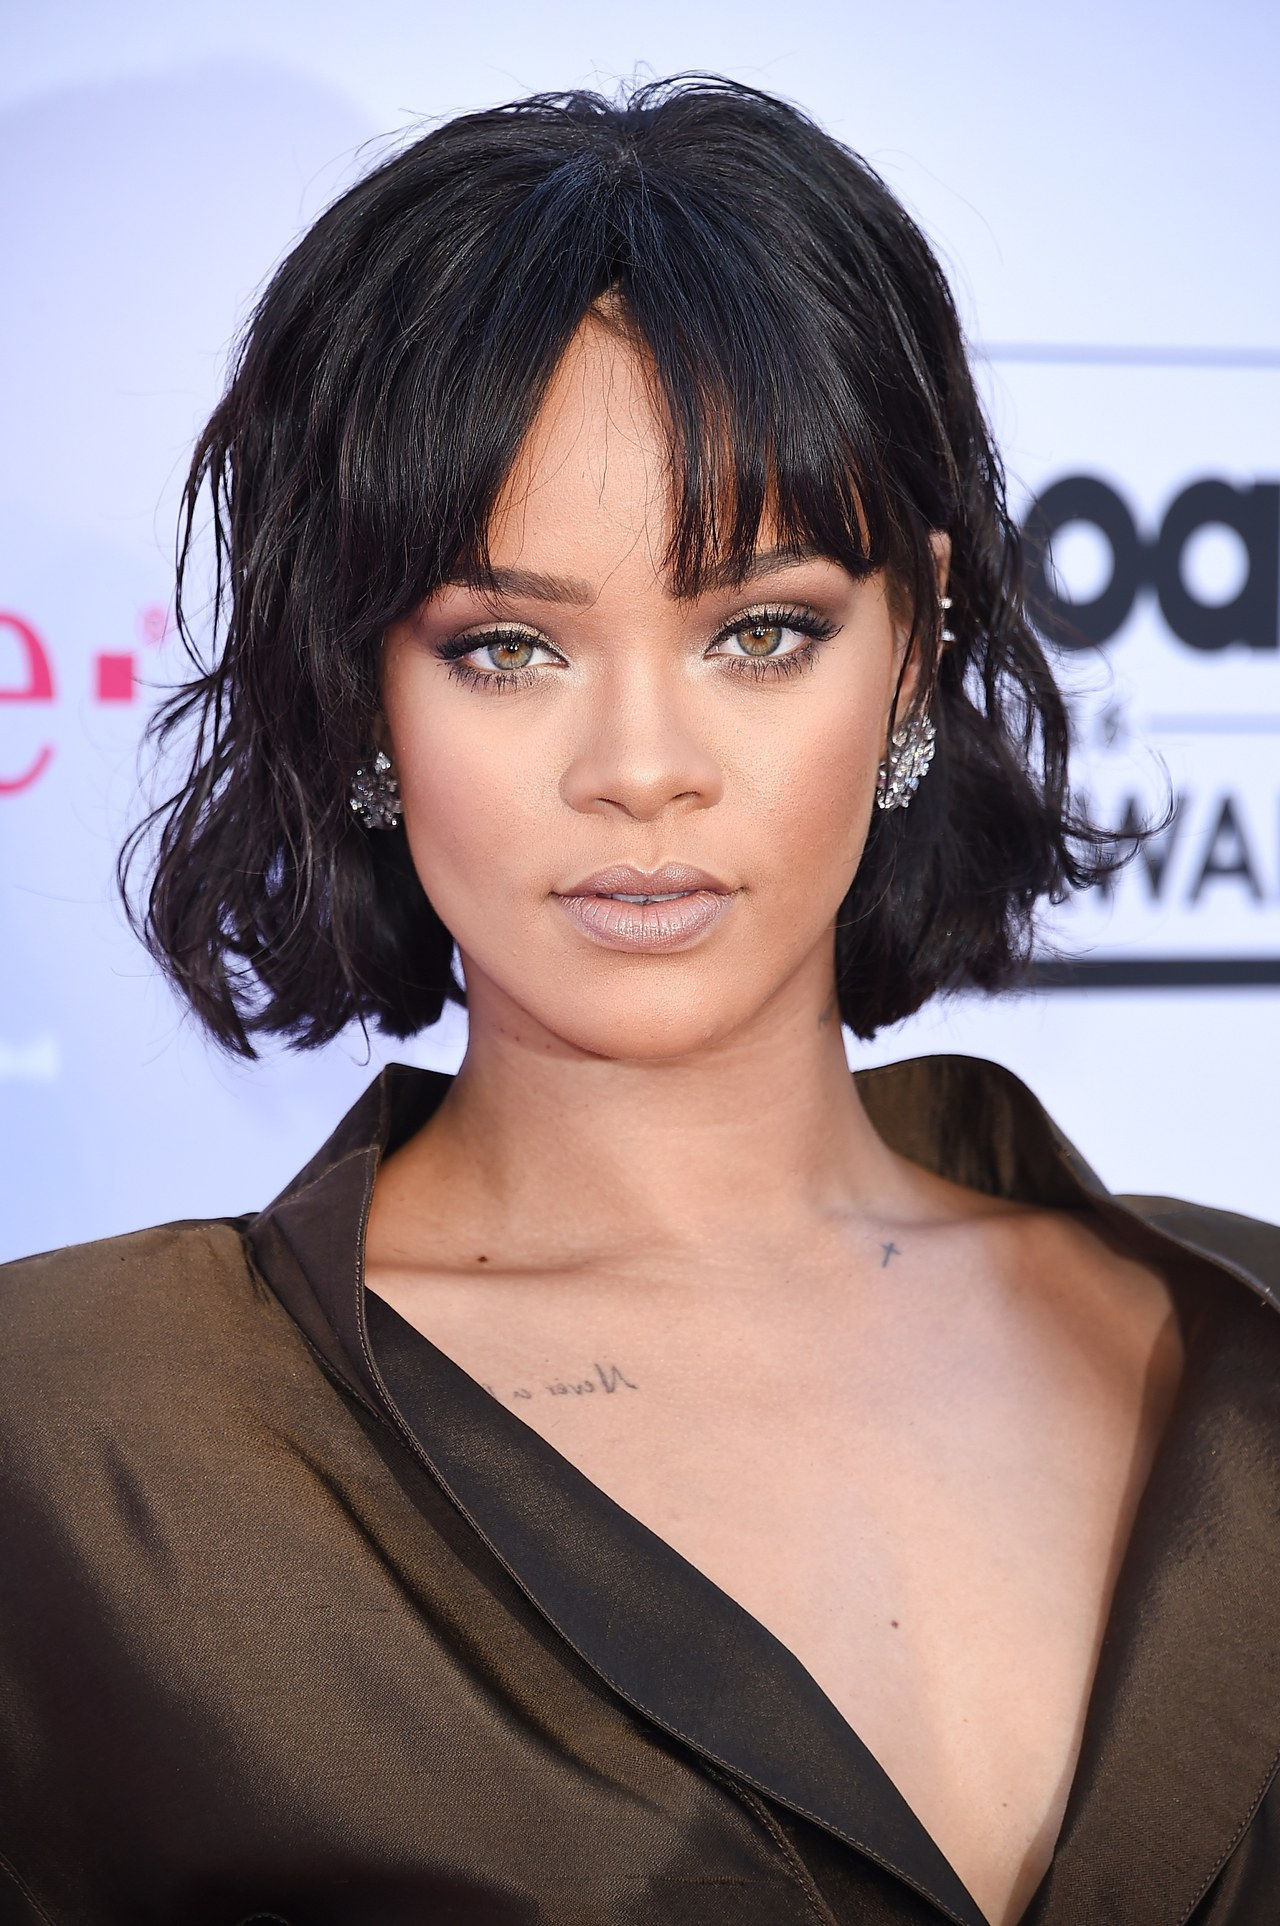 LAS VEGAS, NV - MAY 22: Recording artist Rihanna attends the 2016 Billboard Music Awards at T-Mobile Arena on May 22, 2016 in Las Vegas, Nevada. (Photo by Steve Granitz/WireImage)